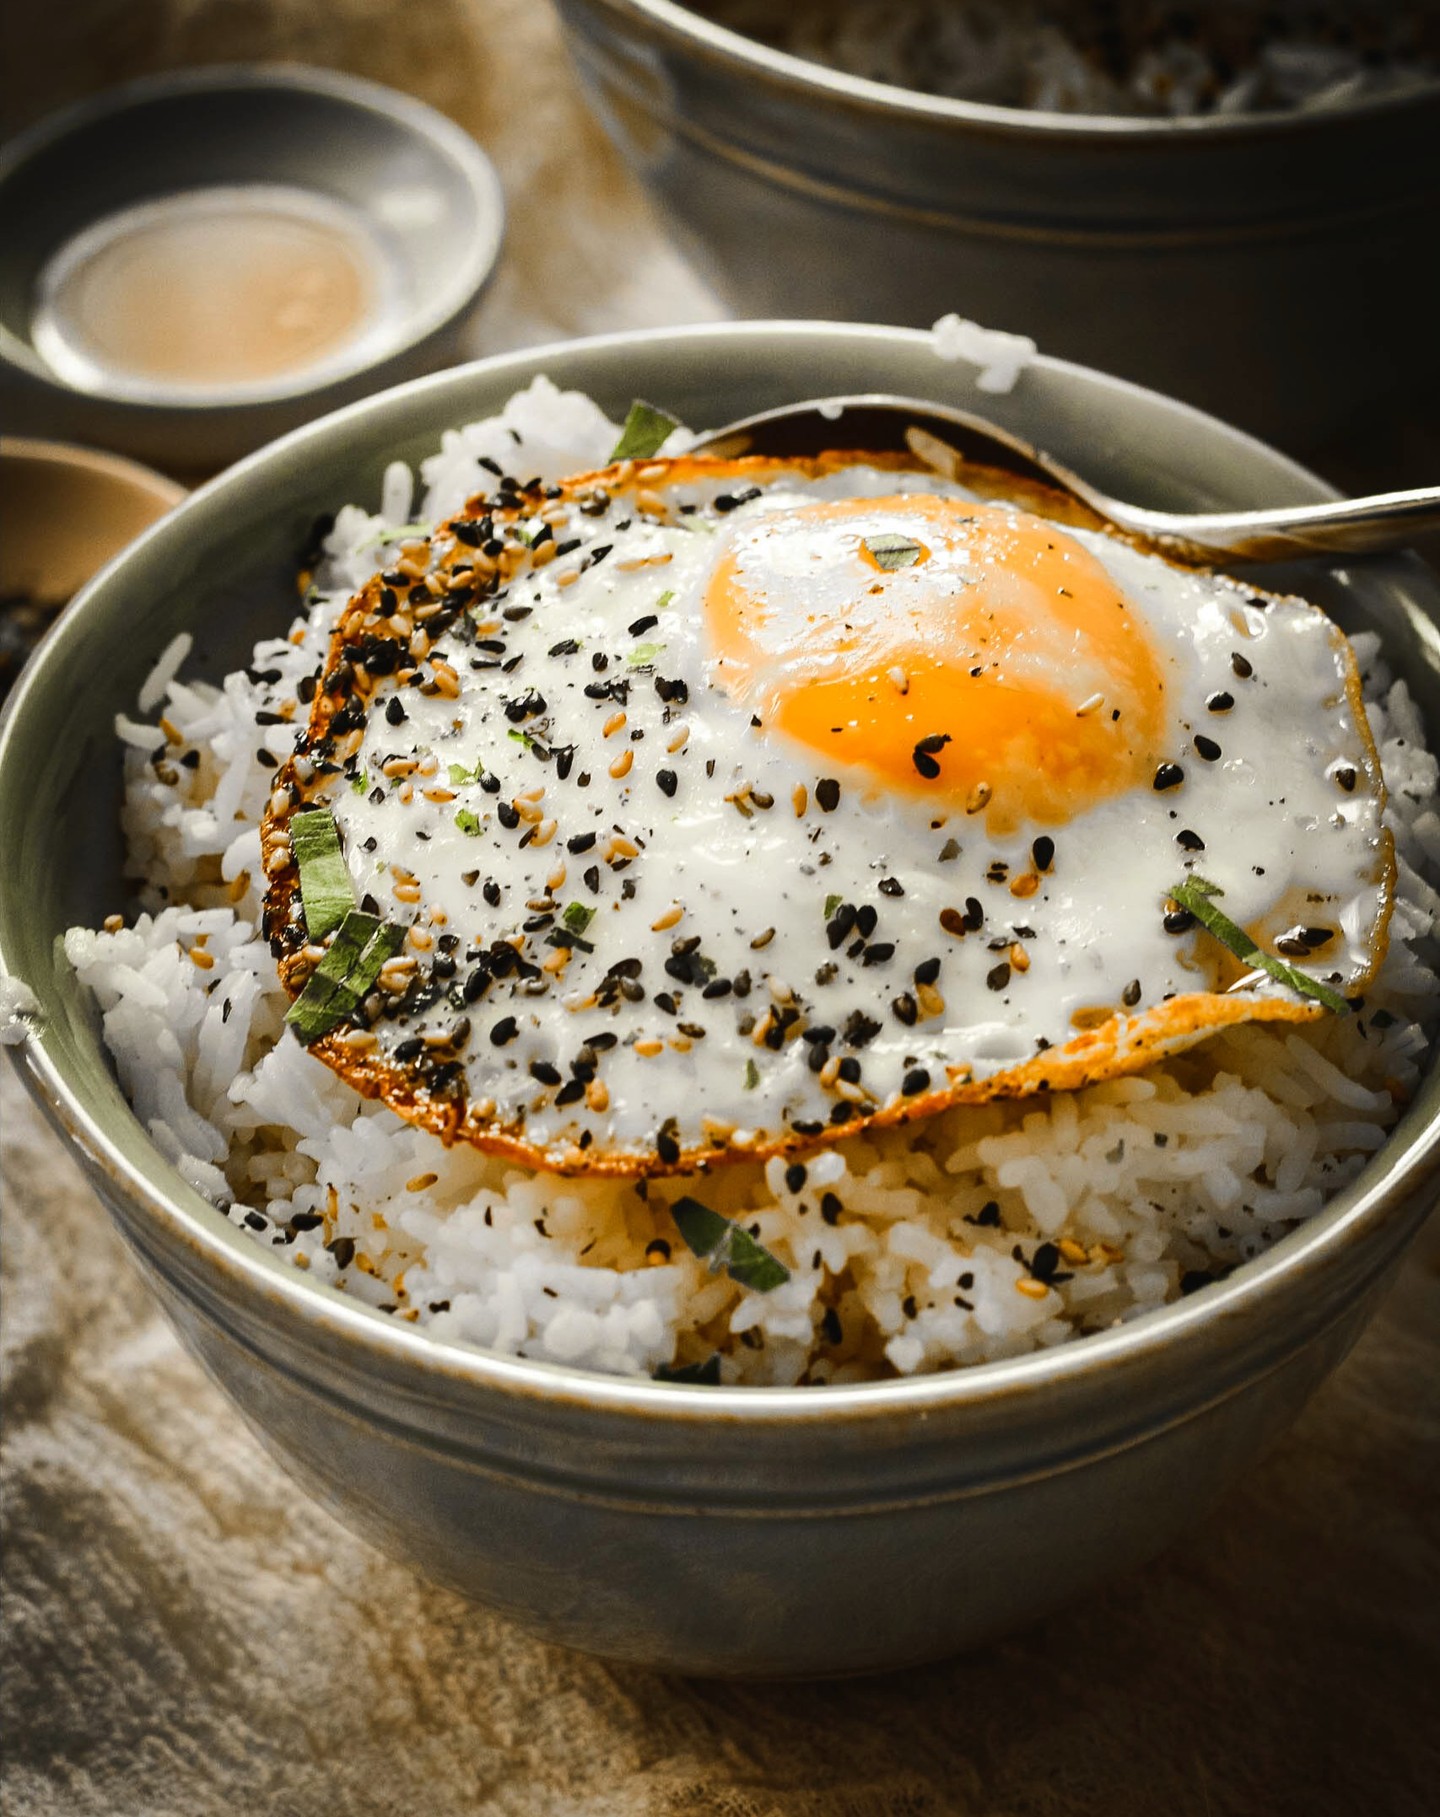 Tomago Kake Gohan is a quick easy breakfast that really can be made to please anyone. This fried egg with rice is the perfect balance of flavors, textures, and you can add on whatever veggies you like to make it an even more healthful dish.
Link to this recipe is in my bio and my stories! 
.
.
.
.
.
.
.
.
.
.
.
.
.
#siftrva #eggs #rice #glutenfreecooking #thebiteshot #citrusseason #f52community #storyofmytable #bombesquad #kitchn #f52grams #thebakefeed #bakefromscratch #makemore #beautifulfood #foodphotography #foodforfoodies #shareyourtable #wherewomencreate #foodphotographyandstyling #theartofslowliving #eatrealfood #heresmyfood #imsomartha #pursueyourpassion #mywilliamssonoma #foodfluffer #foodtographyschool #glutenfree

@thebakefeed @thekitchn @foodtographyschool @surlatable